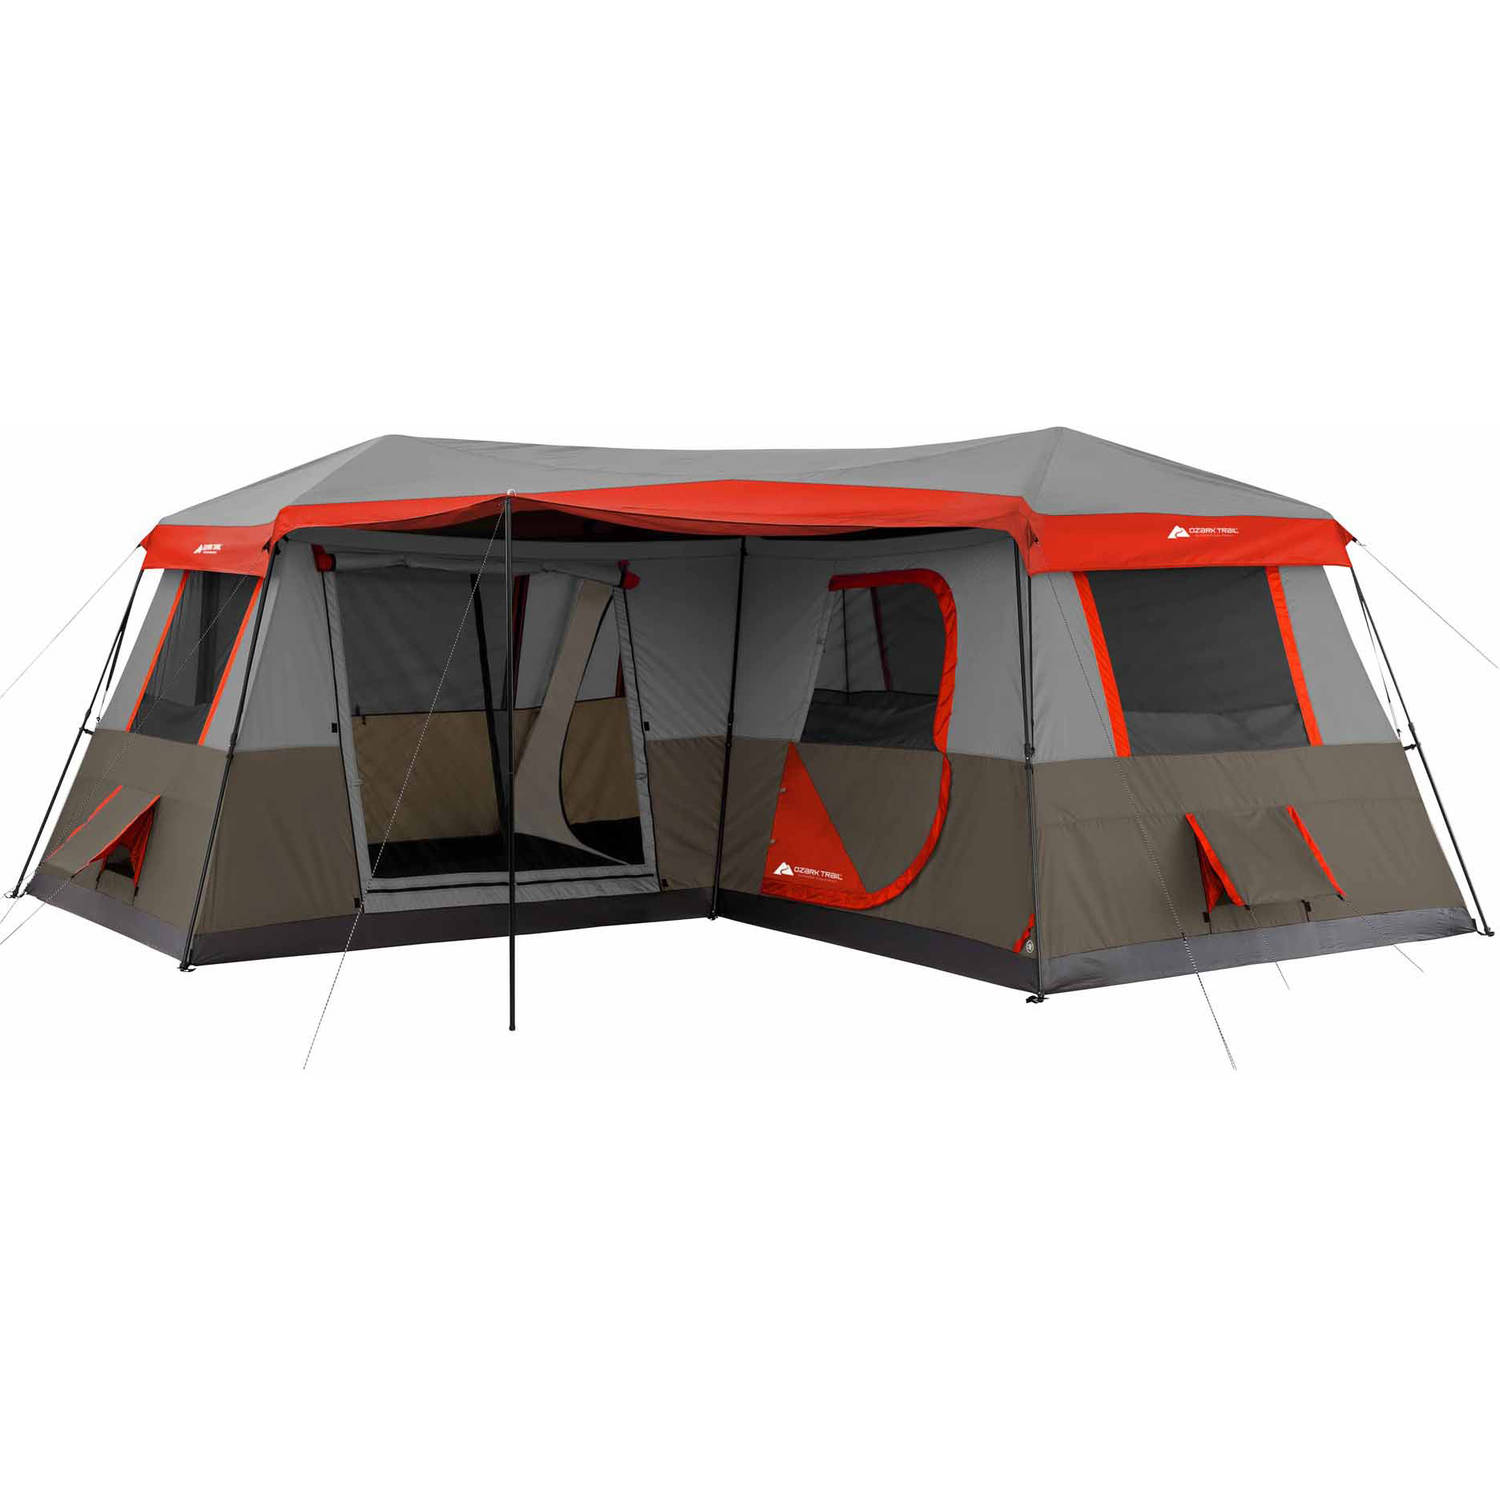 Top 10 Best Large Family Camping Tents Tested and Reviewed